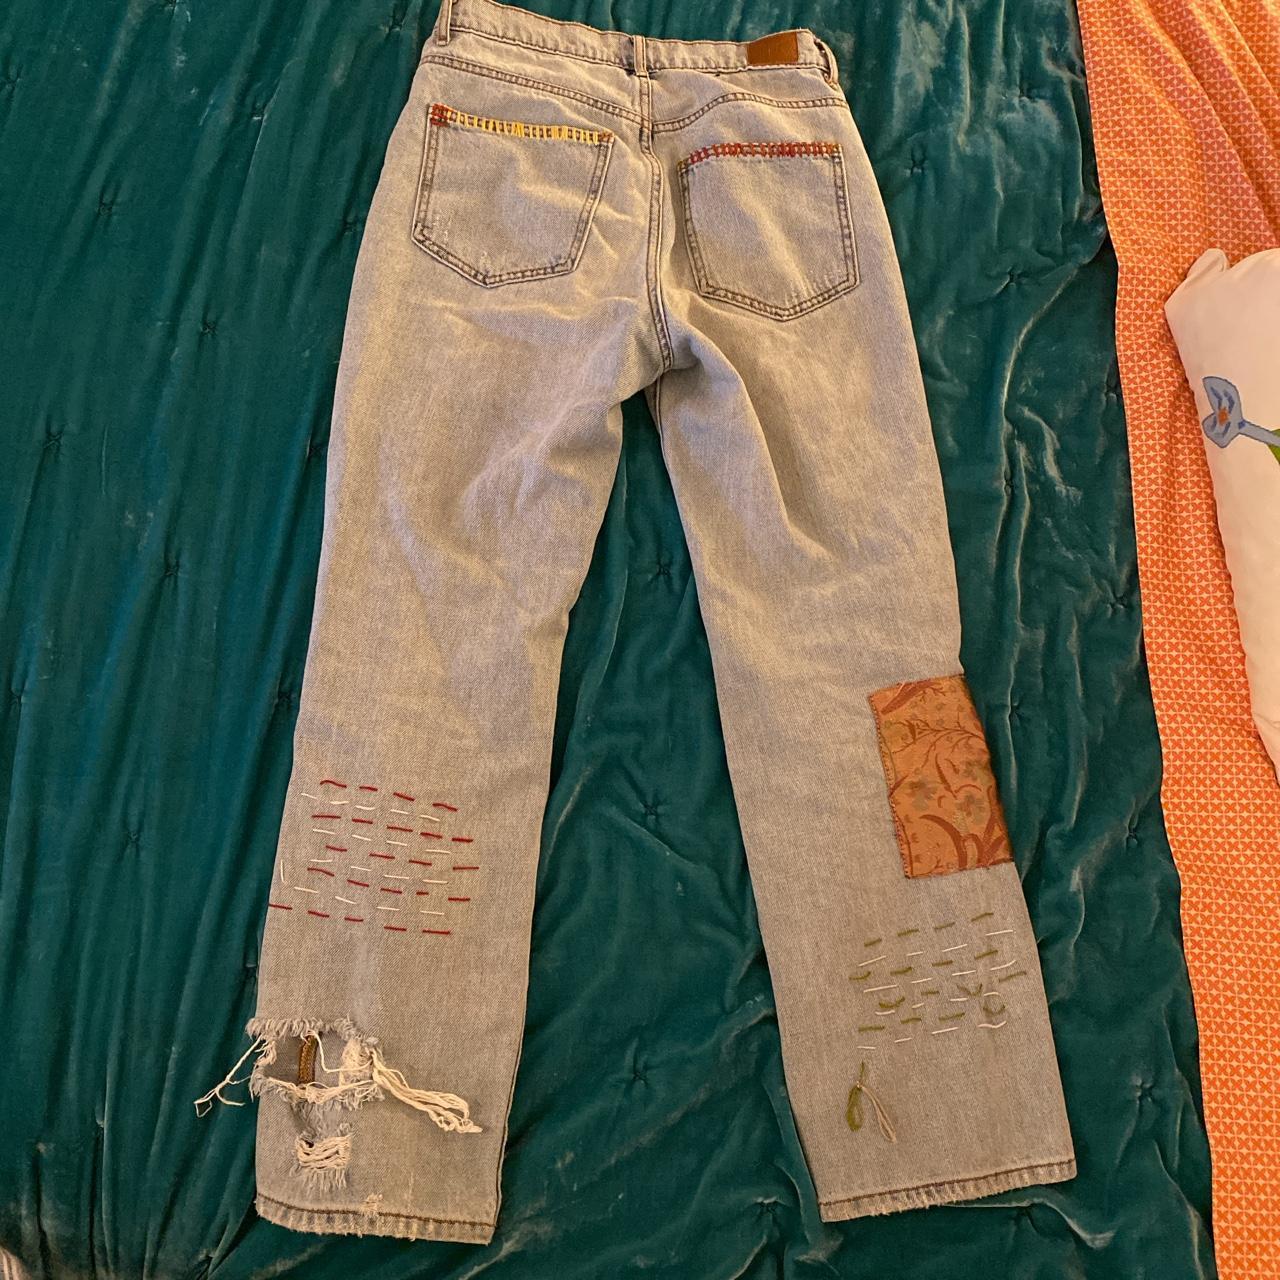 Urban outfitters grunge cowboy jeans size 27! Loved... - Depop